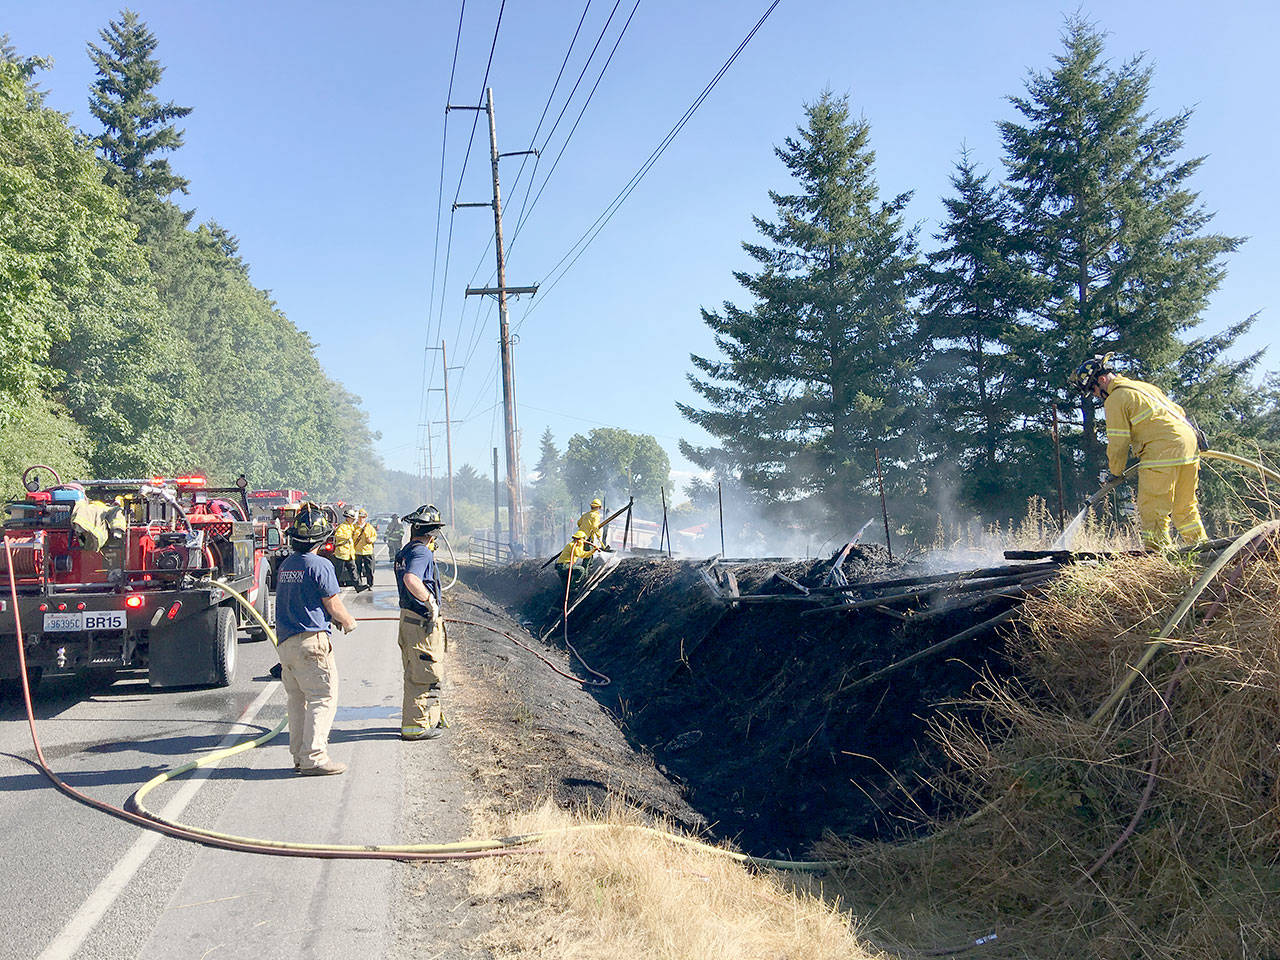 Bill Beezley/East Jefferson Fire-Rescue                                A small grass fire shut down state Highway 19 while crews doused the area. The fire was likely sparked accidentally by a cigarette thrown from a passing vehicle, officials said.